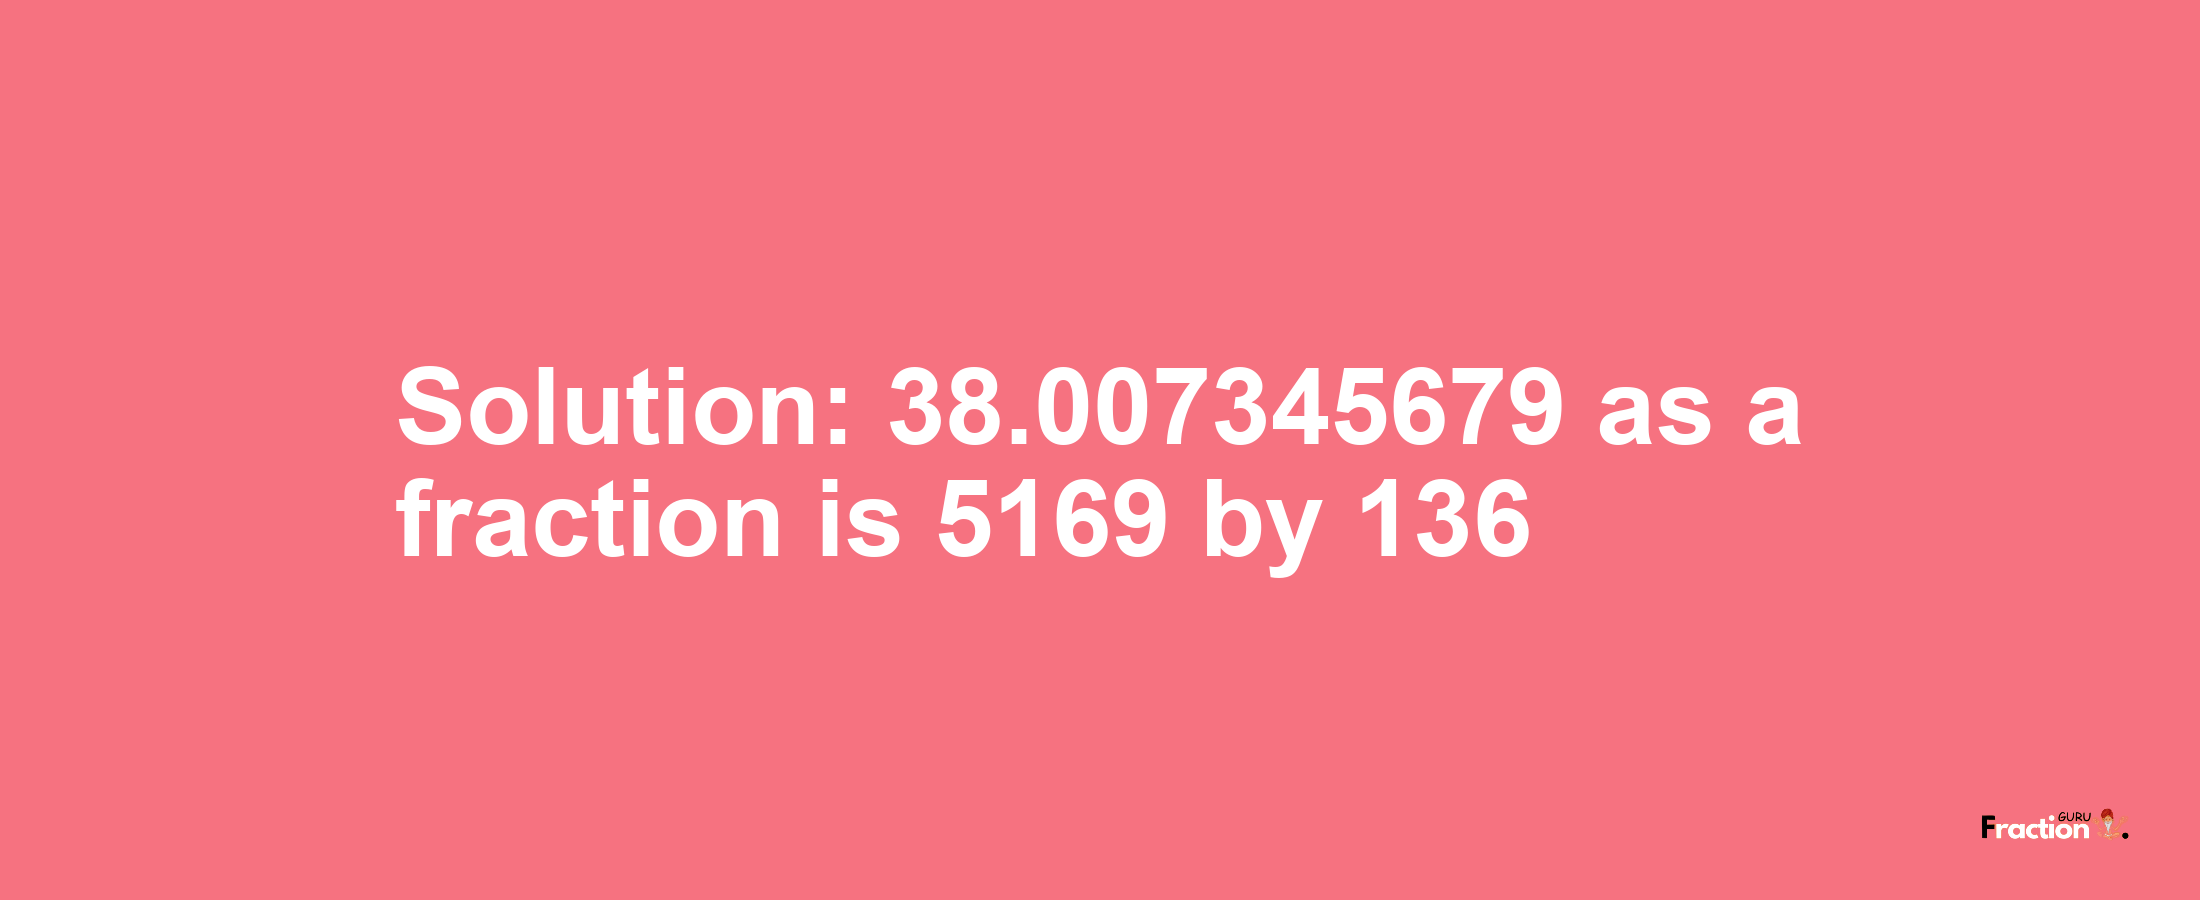 Solution:38.007345679 as a fraction is 5169/136